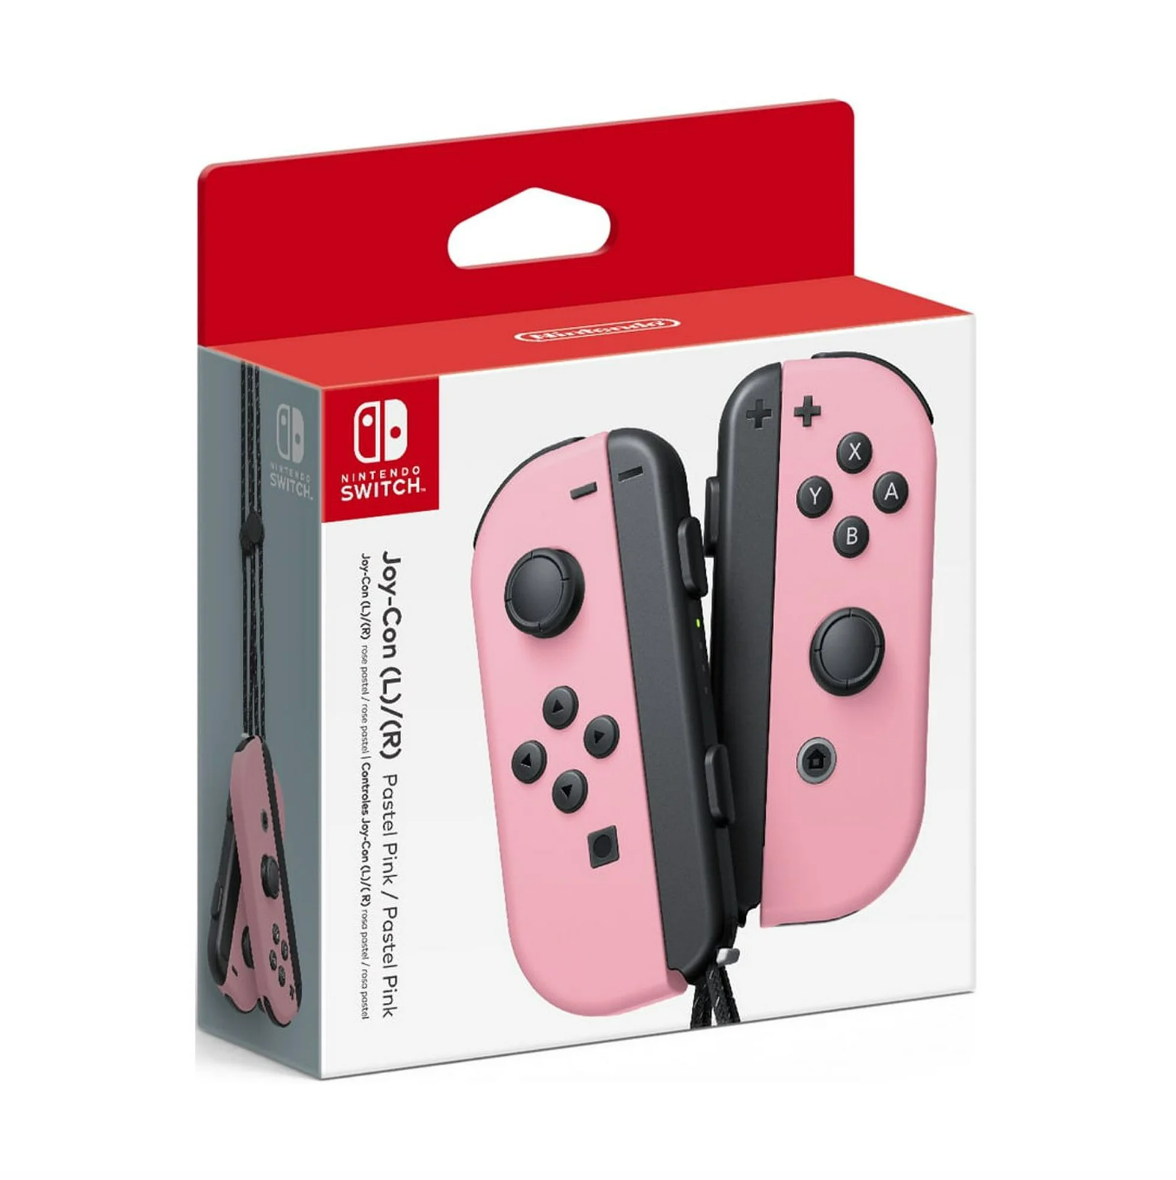 How to Pre-Order the New Princess Peach Pastel Pink Nintendo